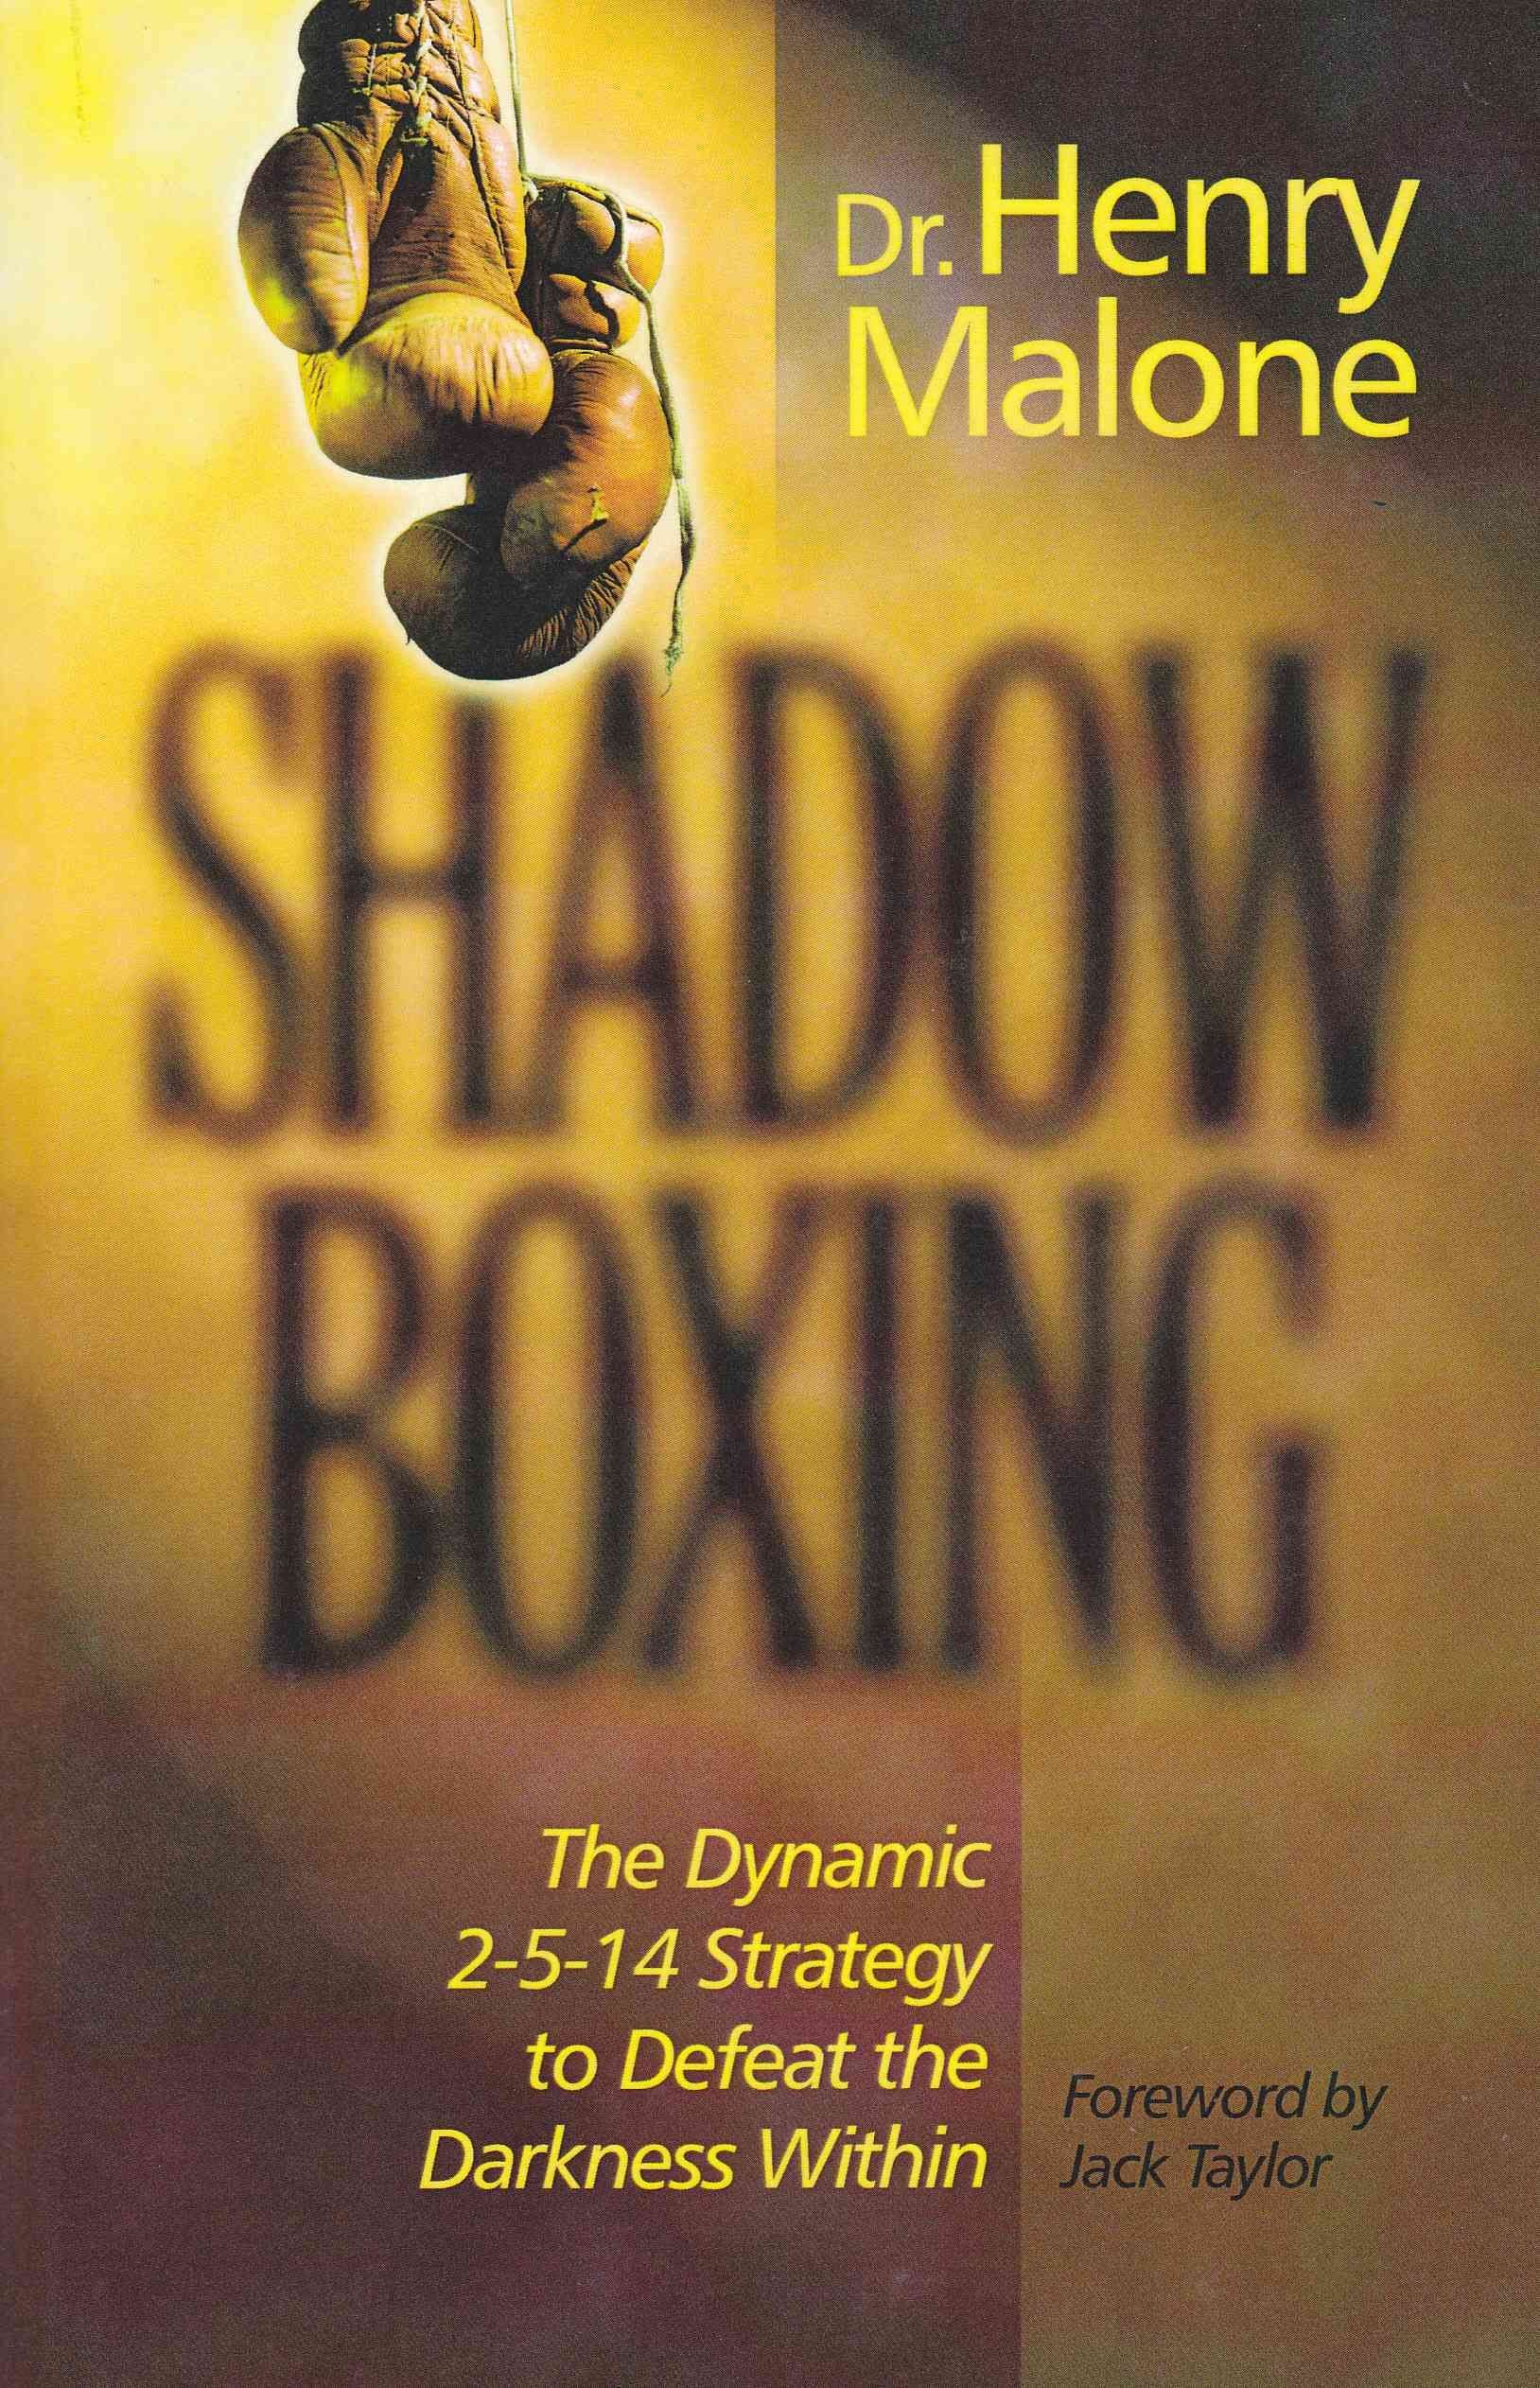 Shadow Boxing